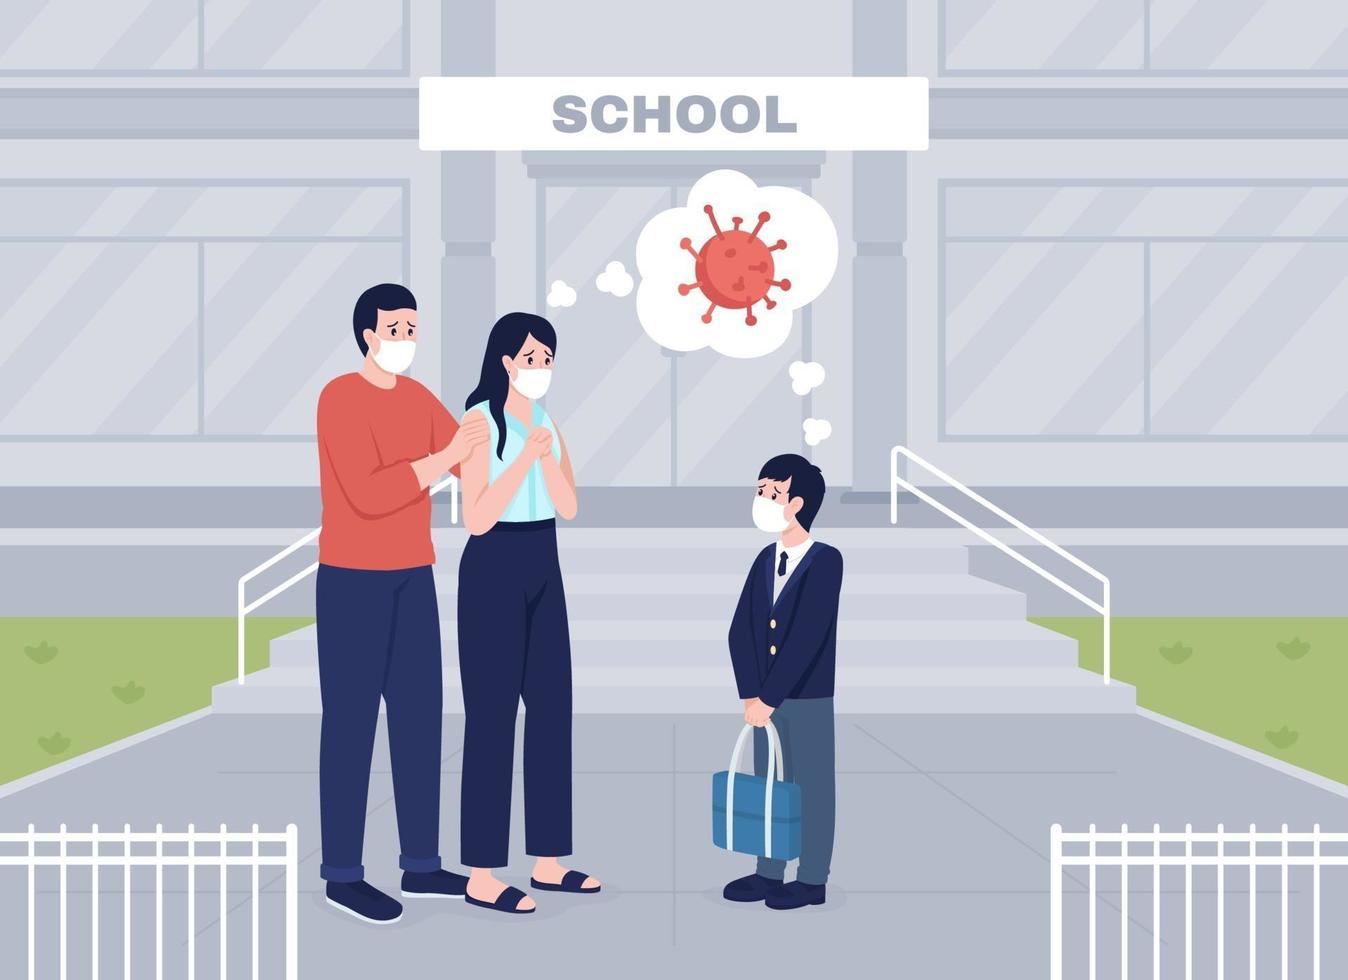 Worried parents see their son off to lessons flat color illustration vector